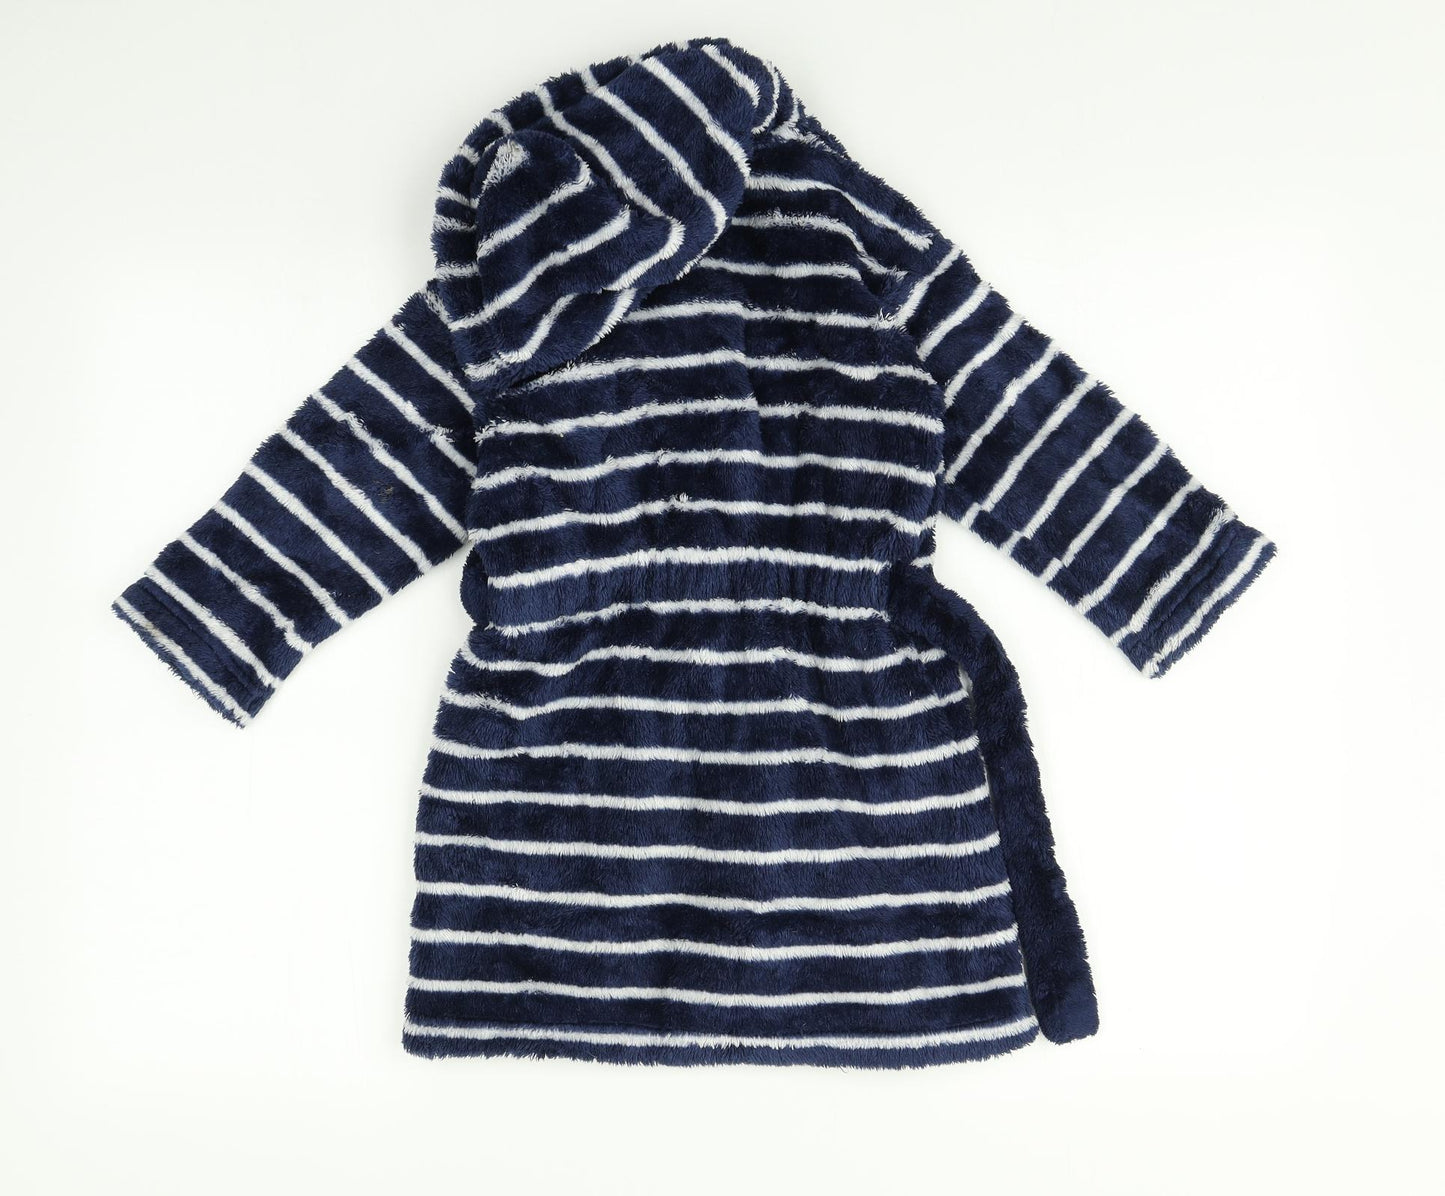 Marks and Spencer Boys  Striped   Robe Size 3-4 Years